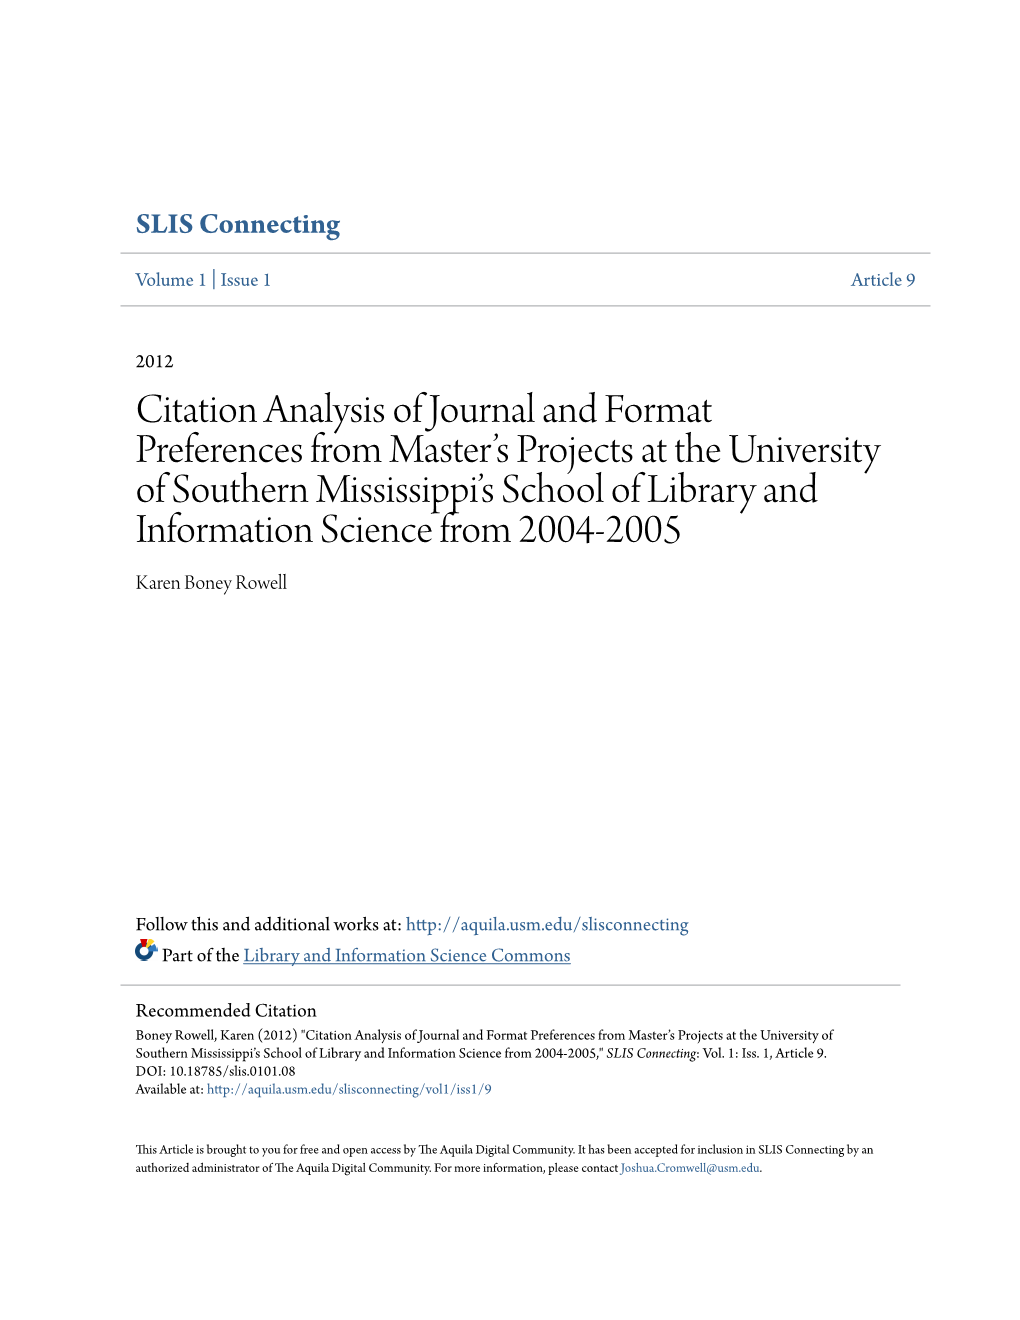 Citation Analysis of Journal and Format Preferences from Master's